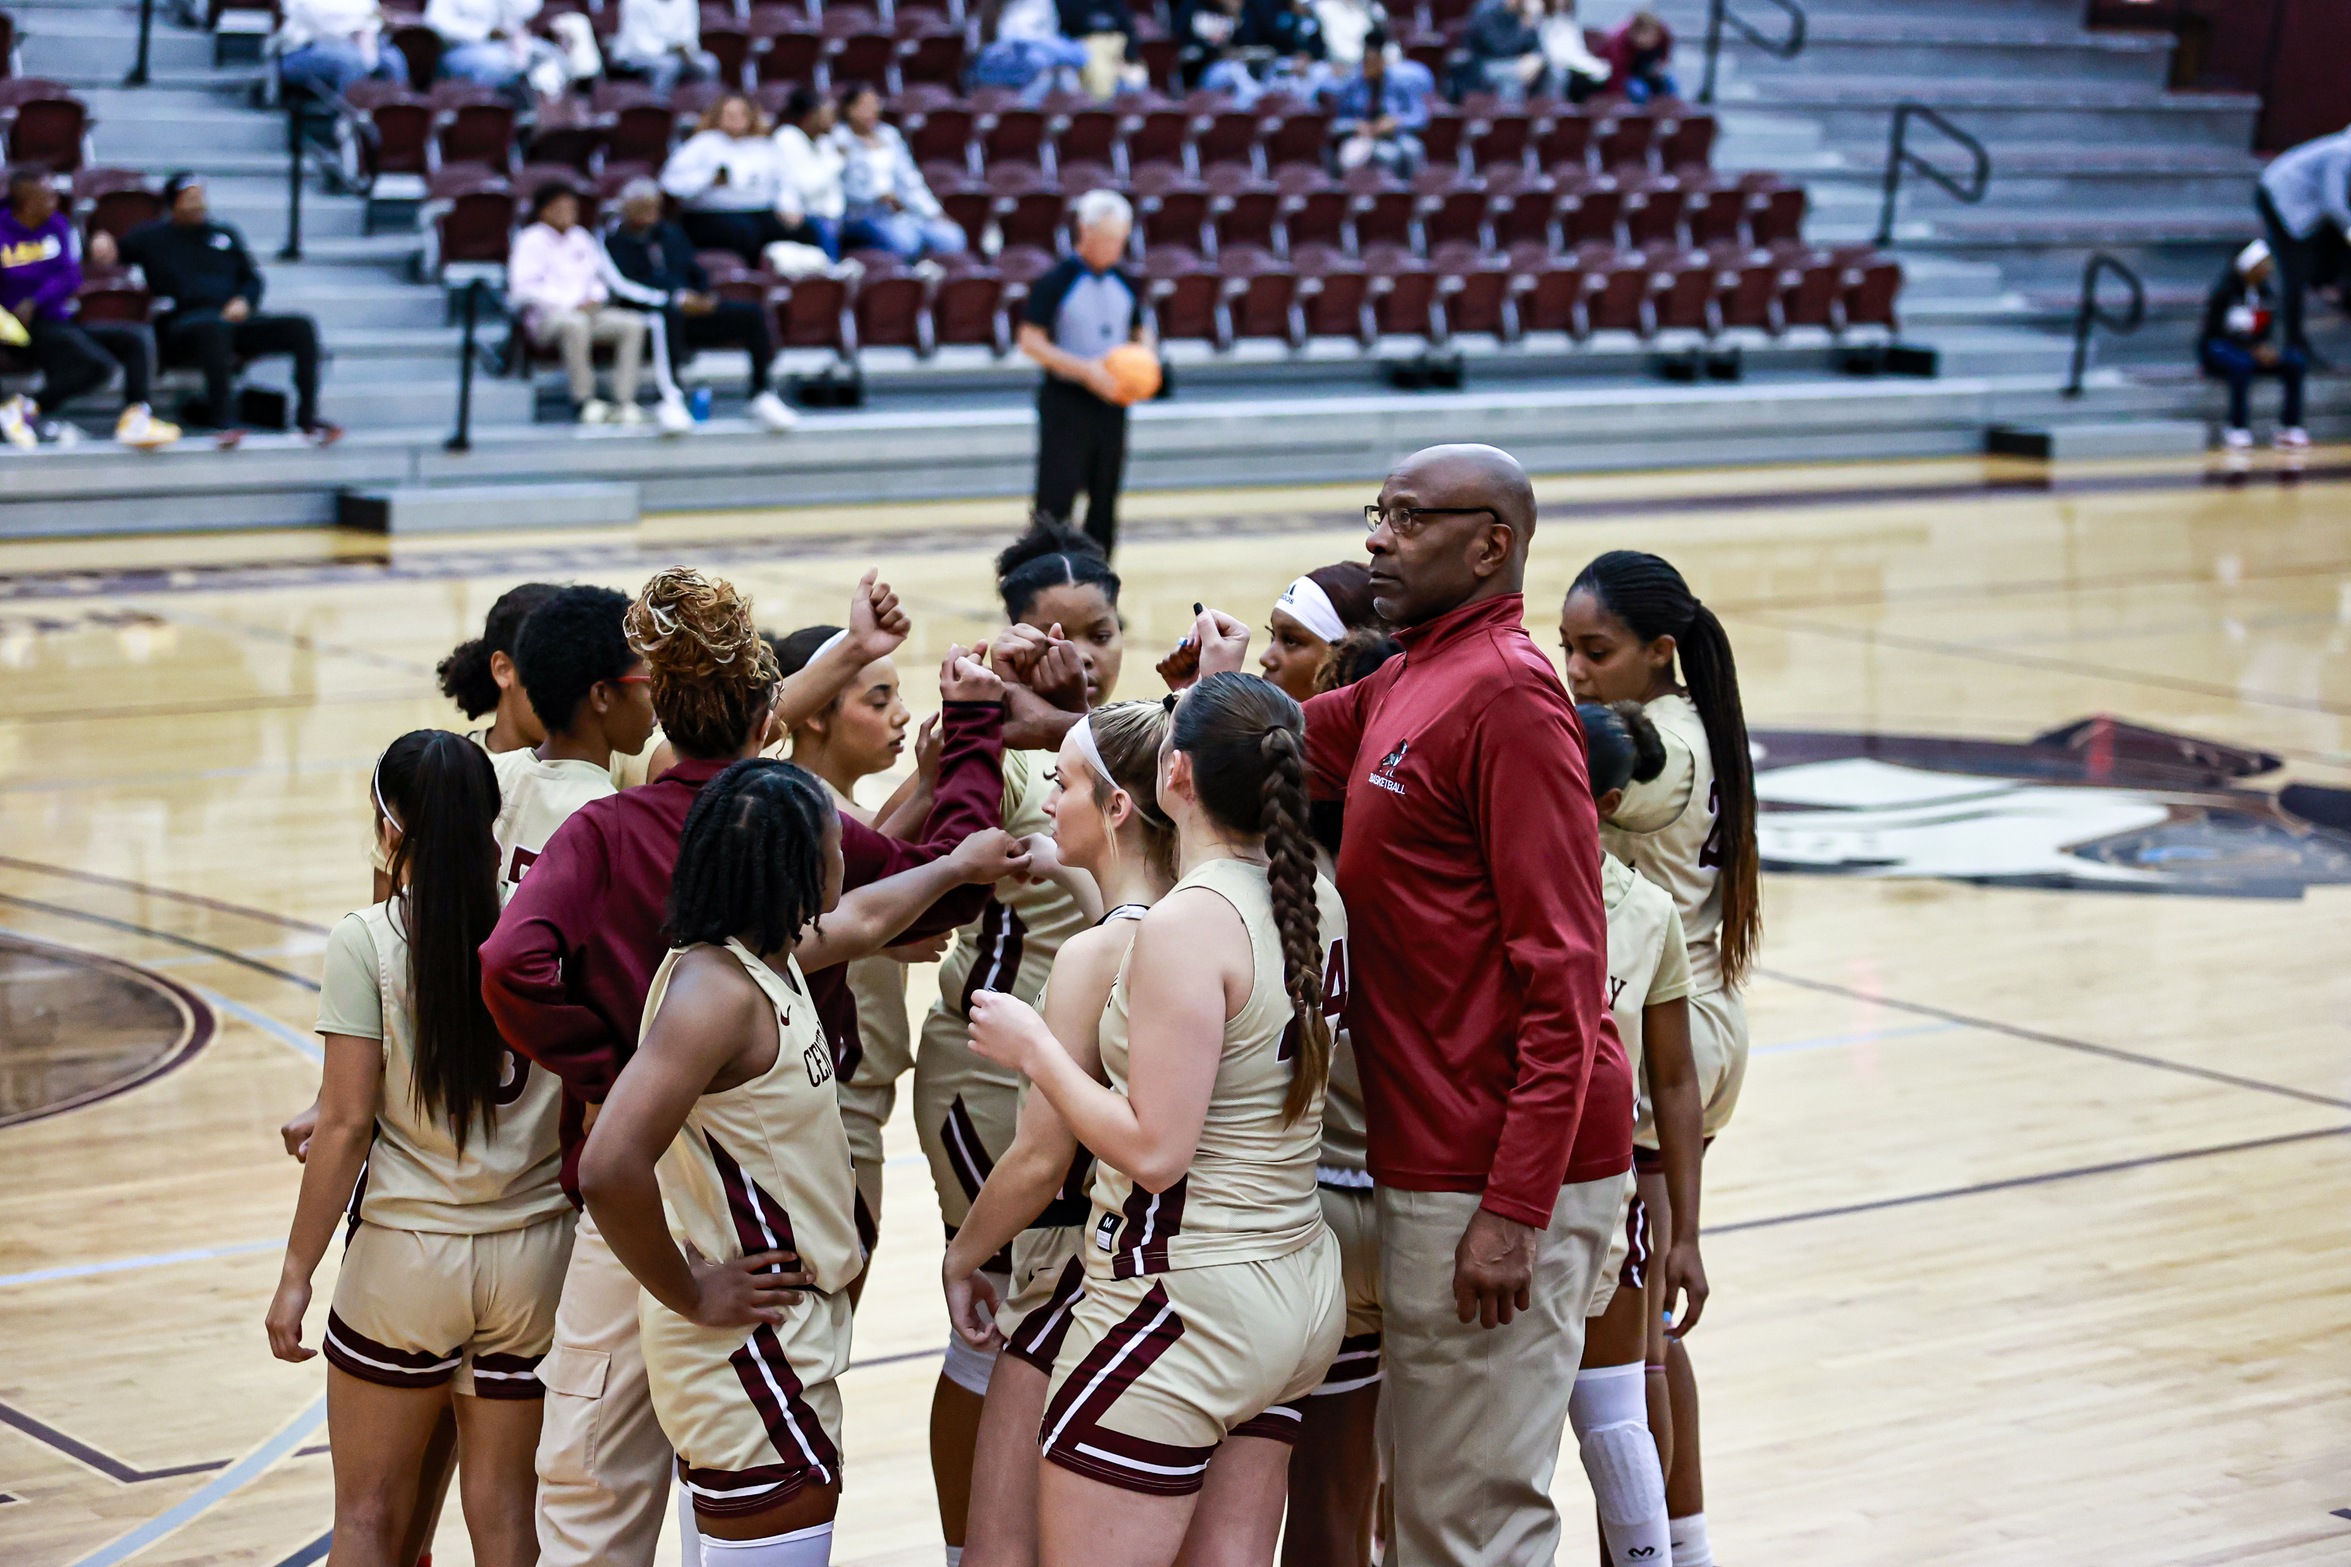 The Ladies allowed a season-low 54 points in Sunday's loss to Southwestern. 

PHOTO: Isabell Gonzales